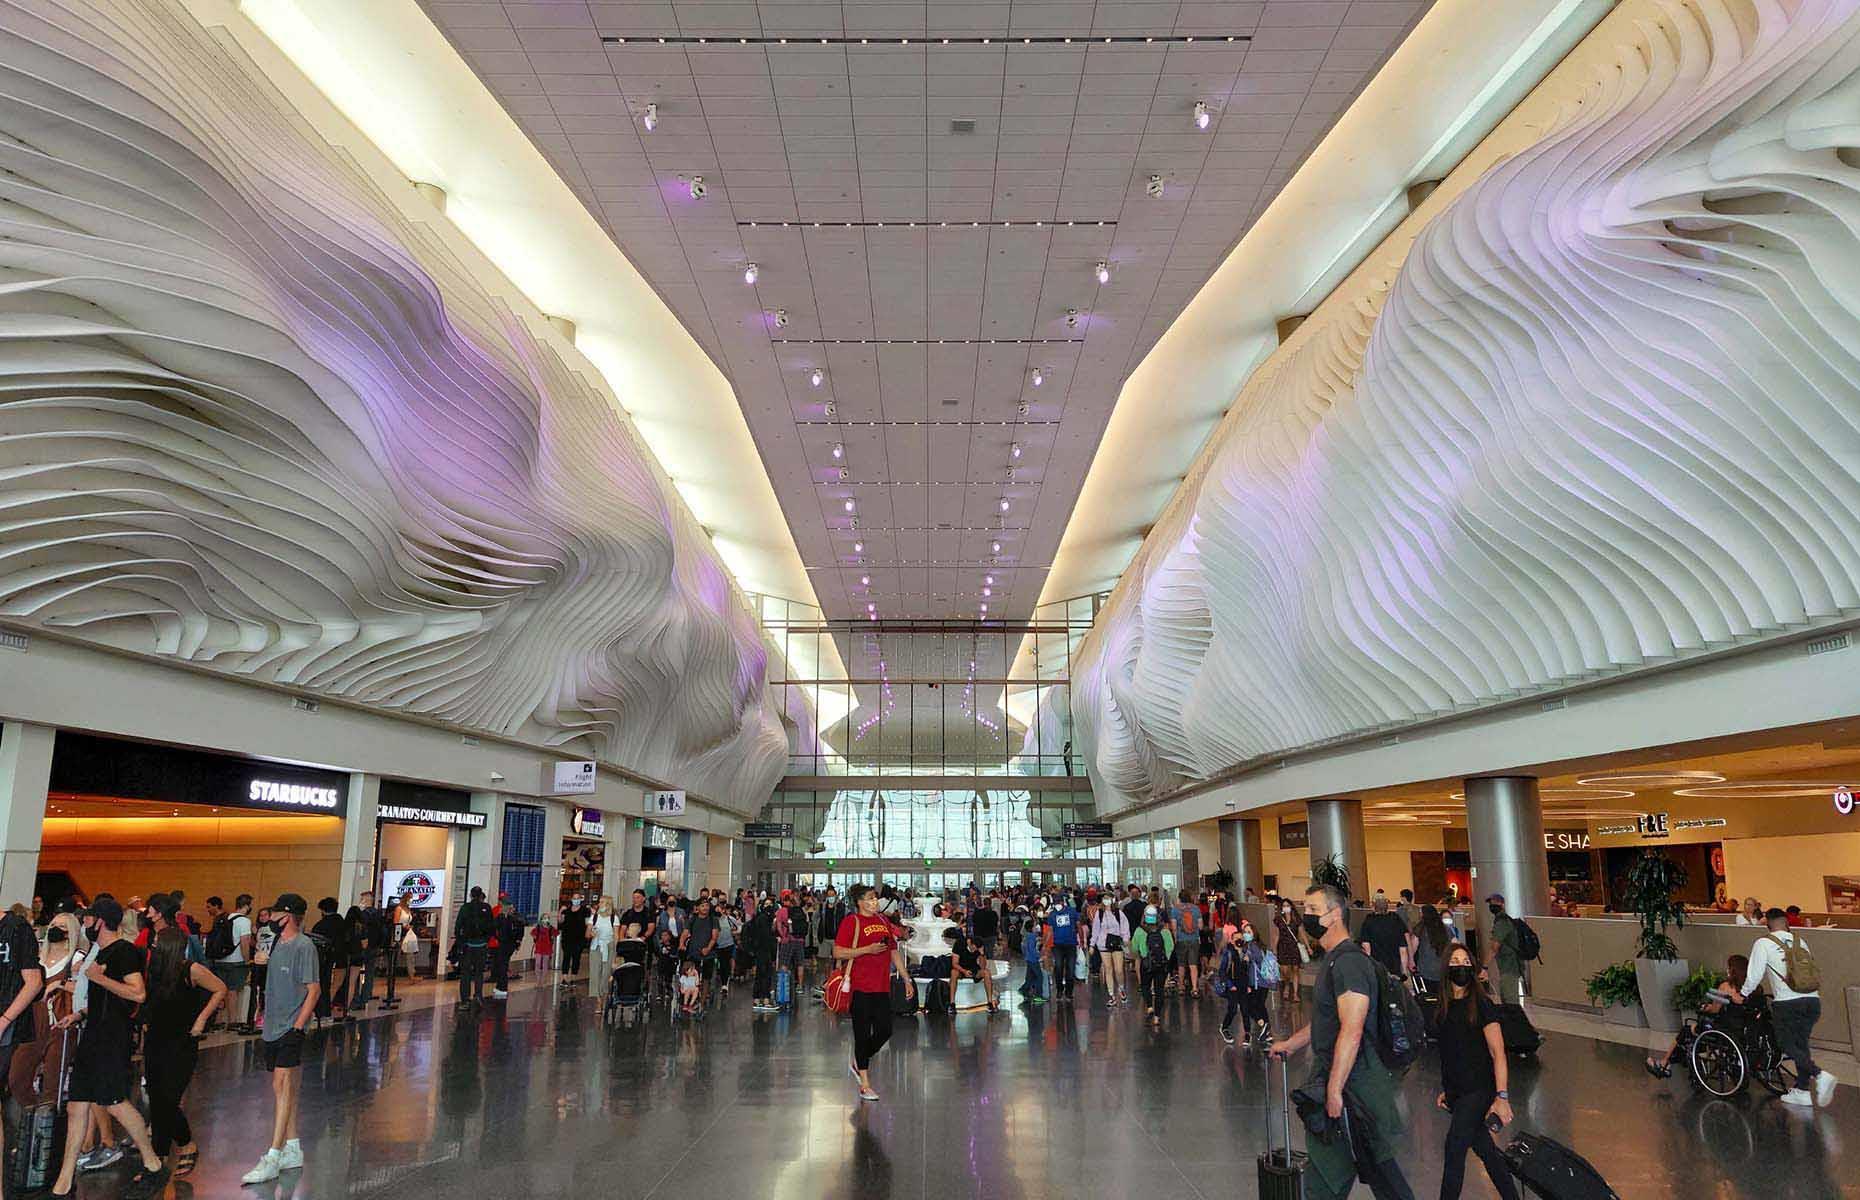 <p>In September 2020, <a href="https://slcairport.com/">Salt Lake City International Airport</a> opened the first part of its <a href="https://www.sltrib.com/news/politics/2020/01/15/price-new-salt-lake-city/">$4.1 billion renovation project</a>: a concourse which includes extensive parking space, high-tech security gates and modern waiting areas. Located five miles (8km) northwest of downtown Salt Lake City, the airport is a hit with travelers thanks to its modern interiors, fast Wi-Fi and high levels of cleanliness, however, some begrudge the long walking distances between gates.</p>